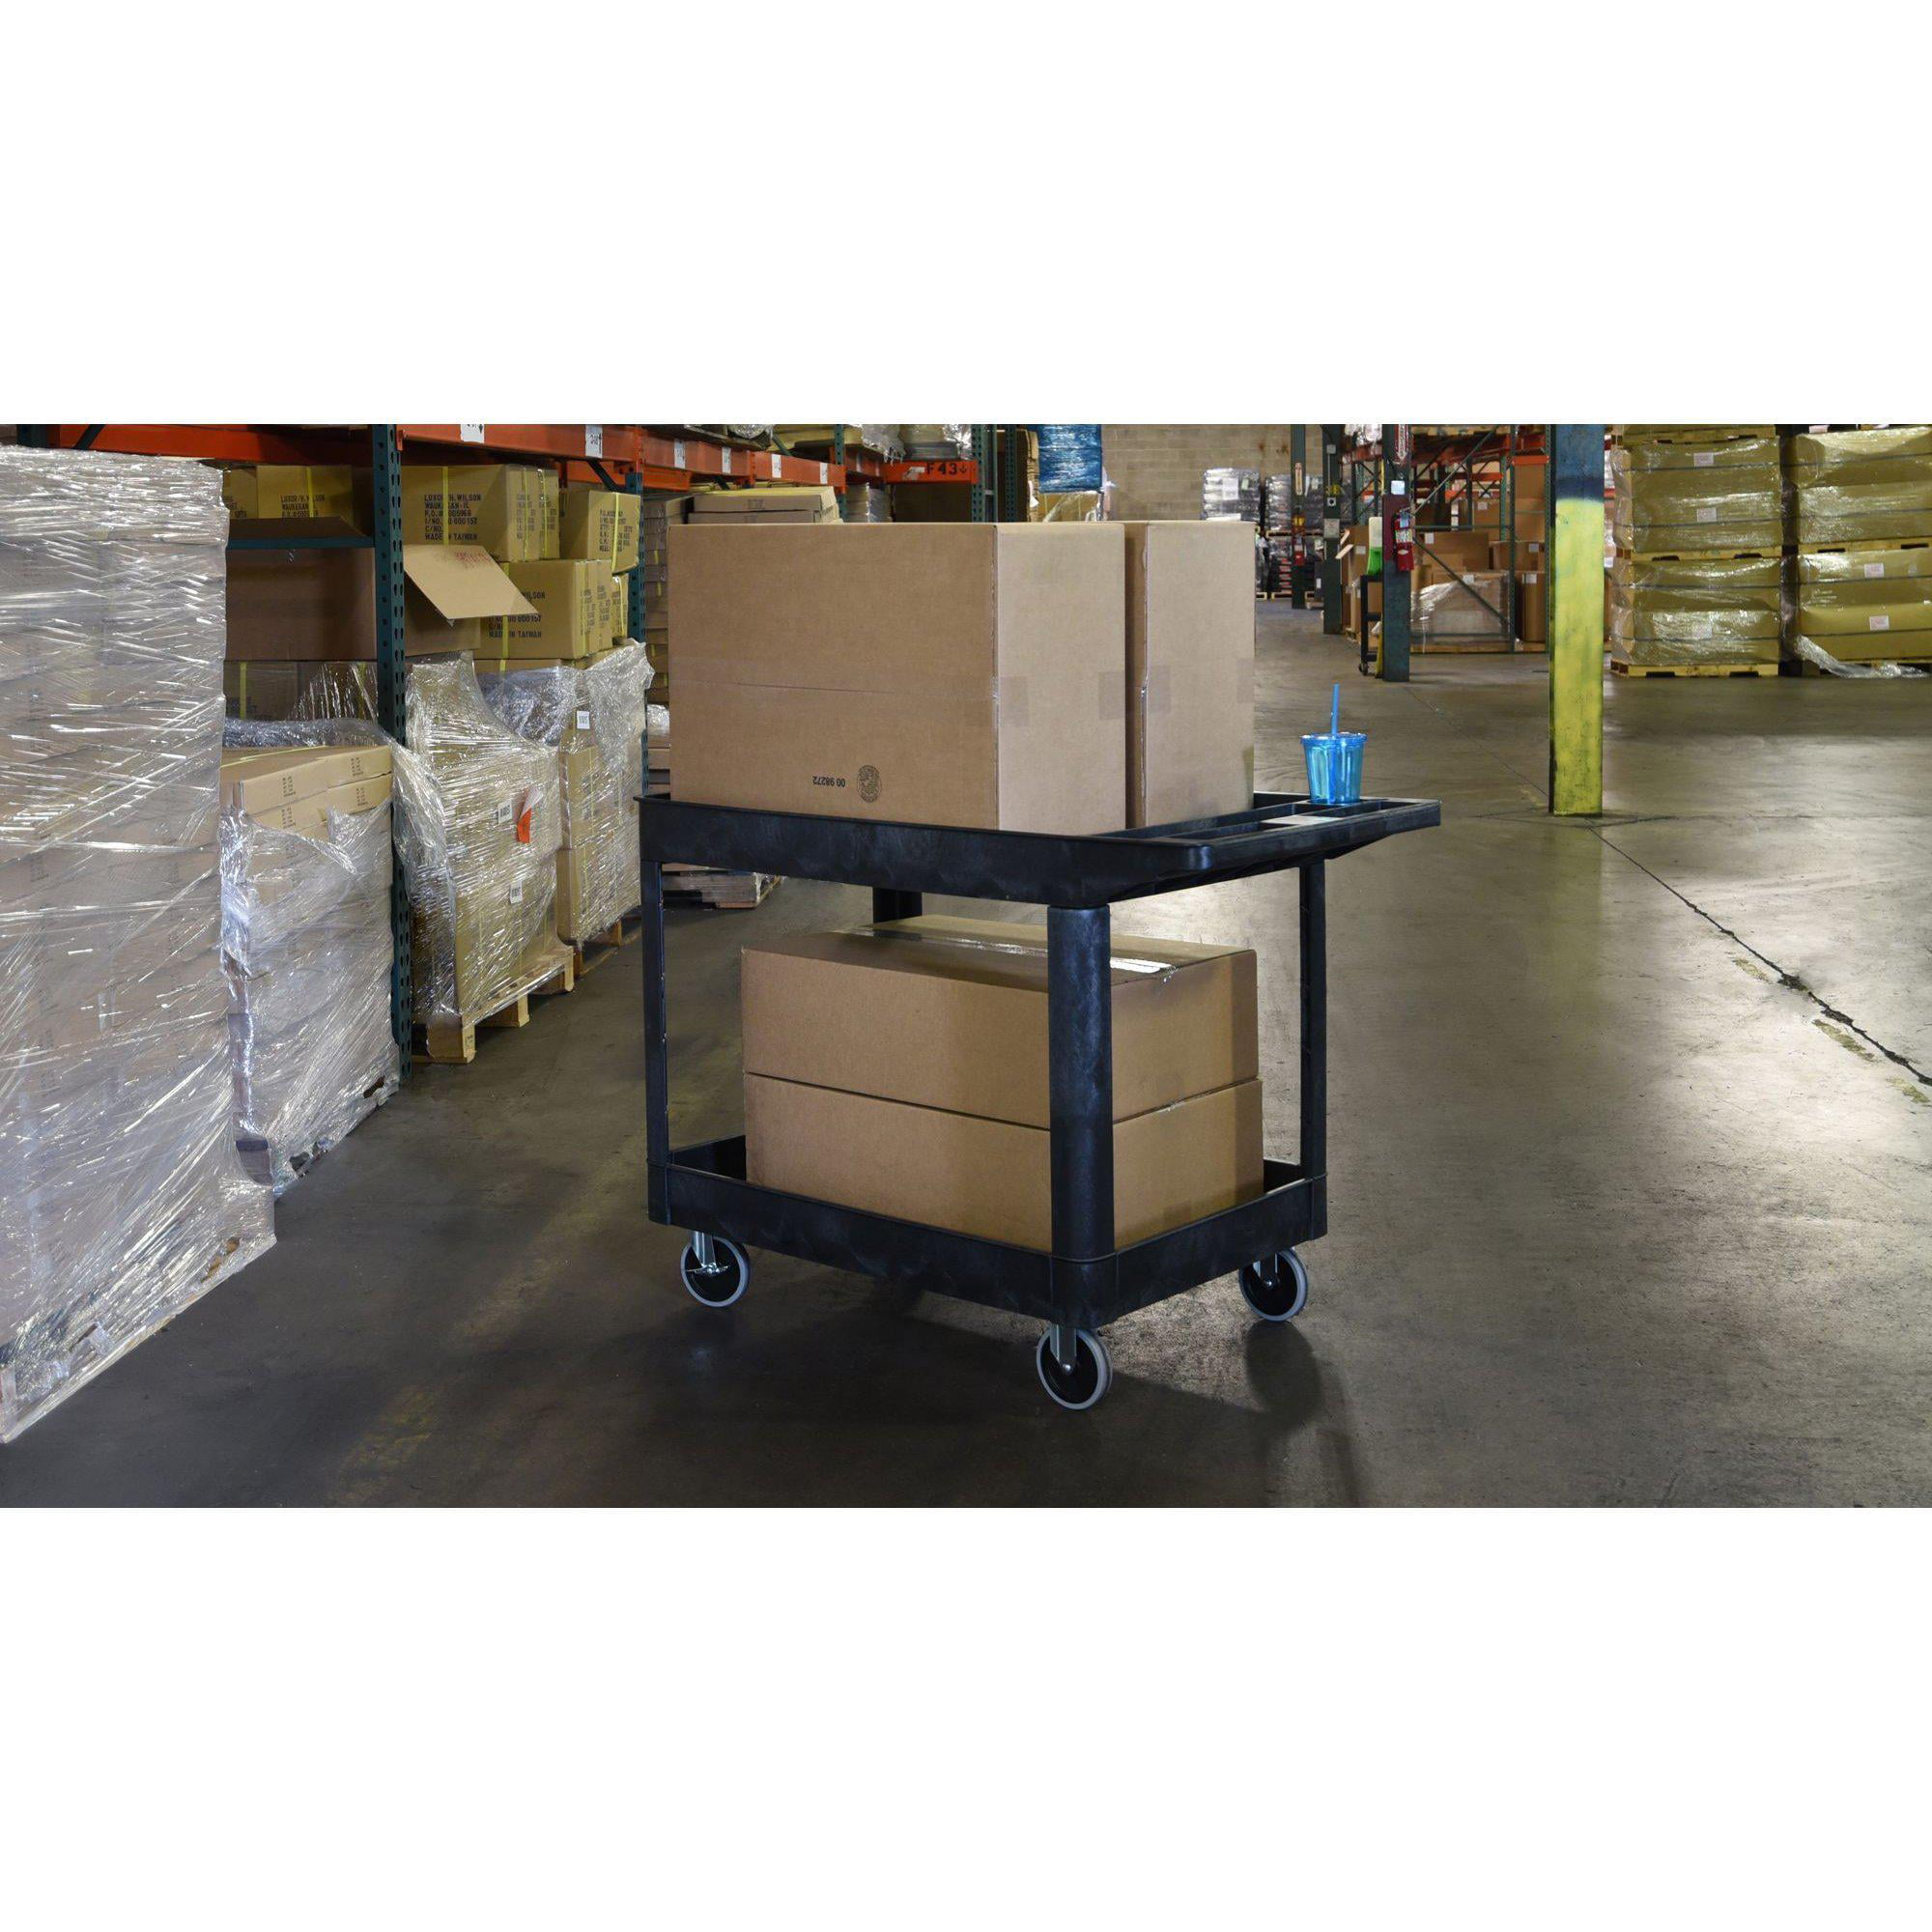 Stand Steady Original Tubstr Extra Large Utility Cart - Heavy Duty Tub Cart  Holds up to 500 Pounds - 2 Shelf, Huge Rolling Cart - Great for Warehouse,  Garage and More (45.5 x 24.5 / Black) - Walmart.com